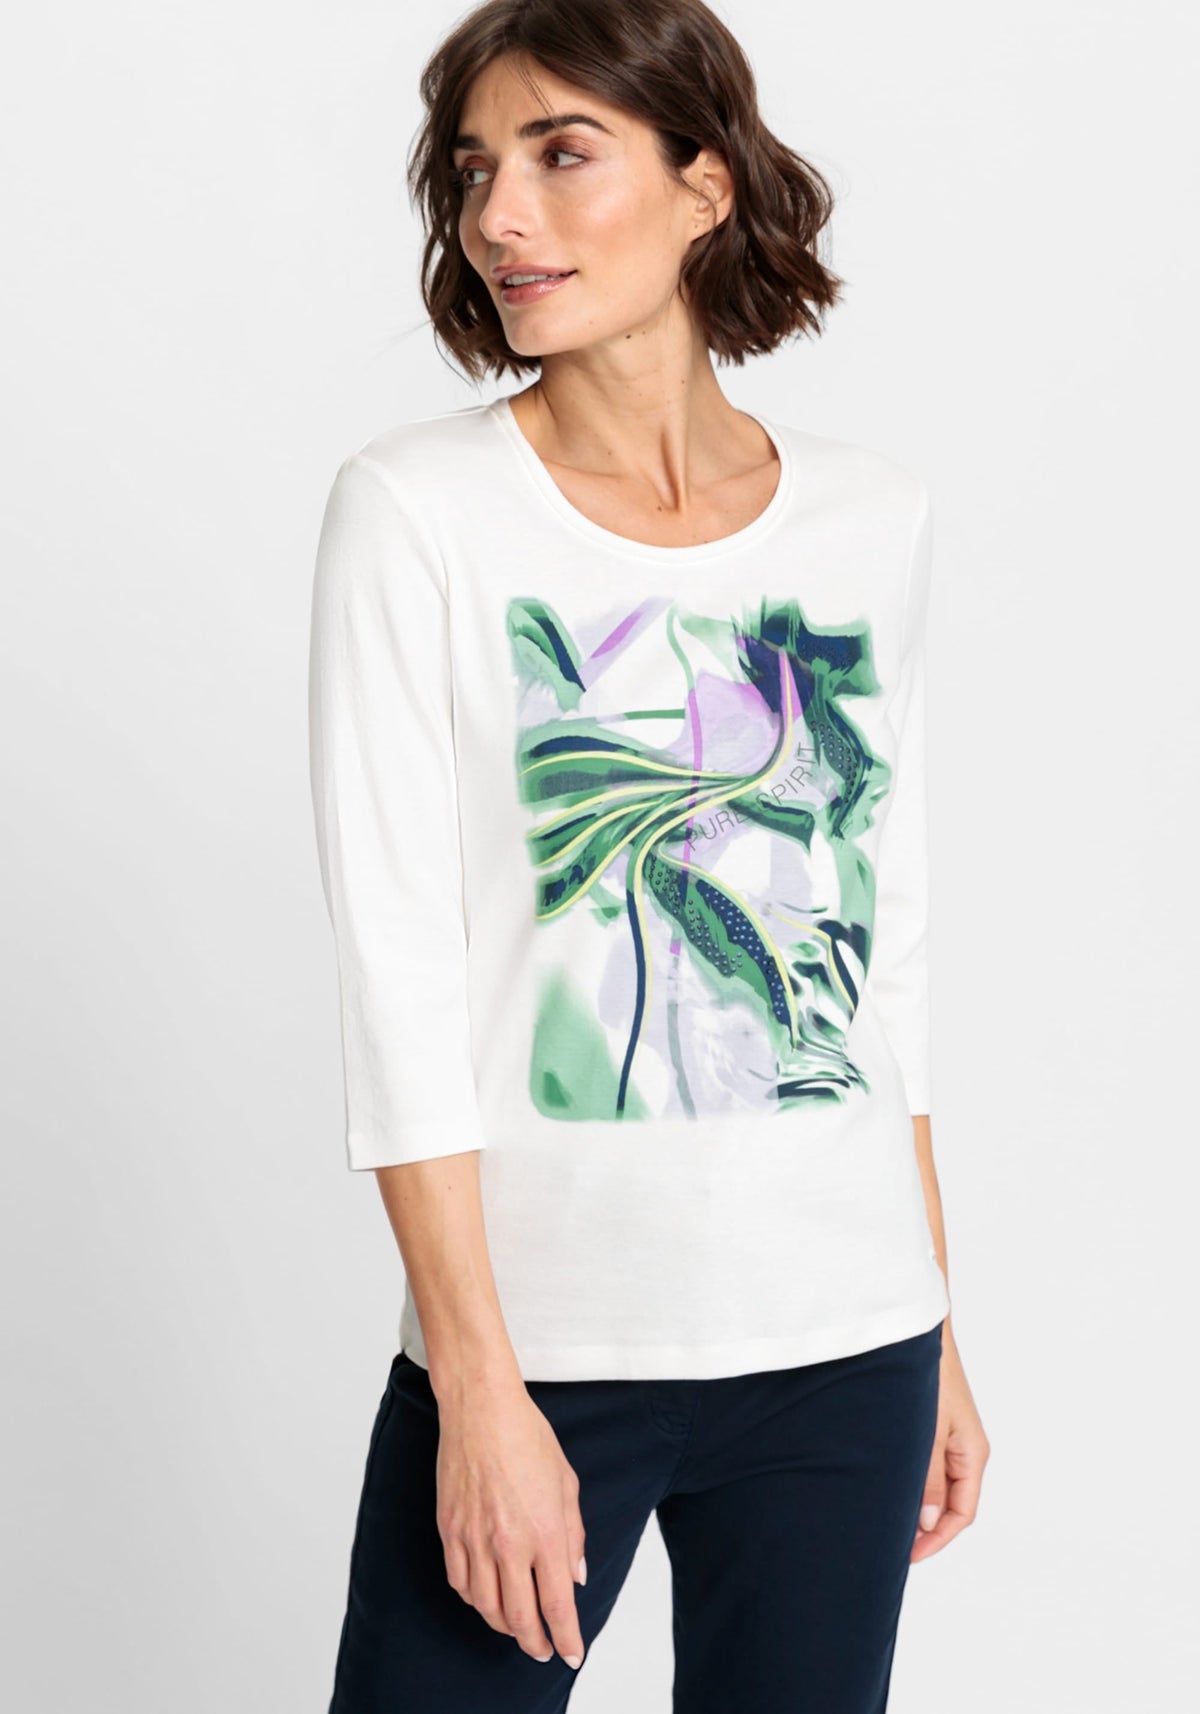 100% Cotton 3/4 Sleeve Abstract Floral Placement Print Tee